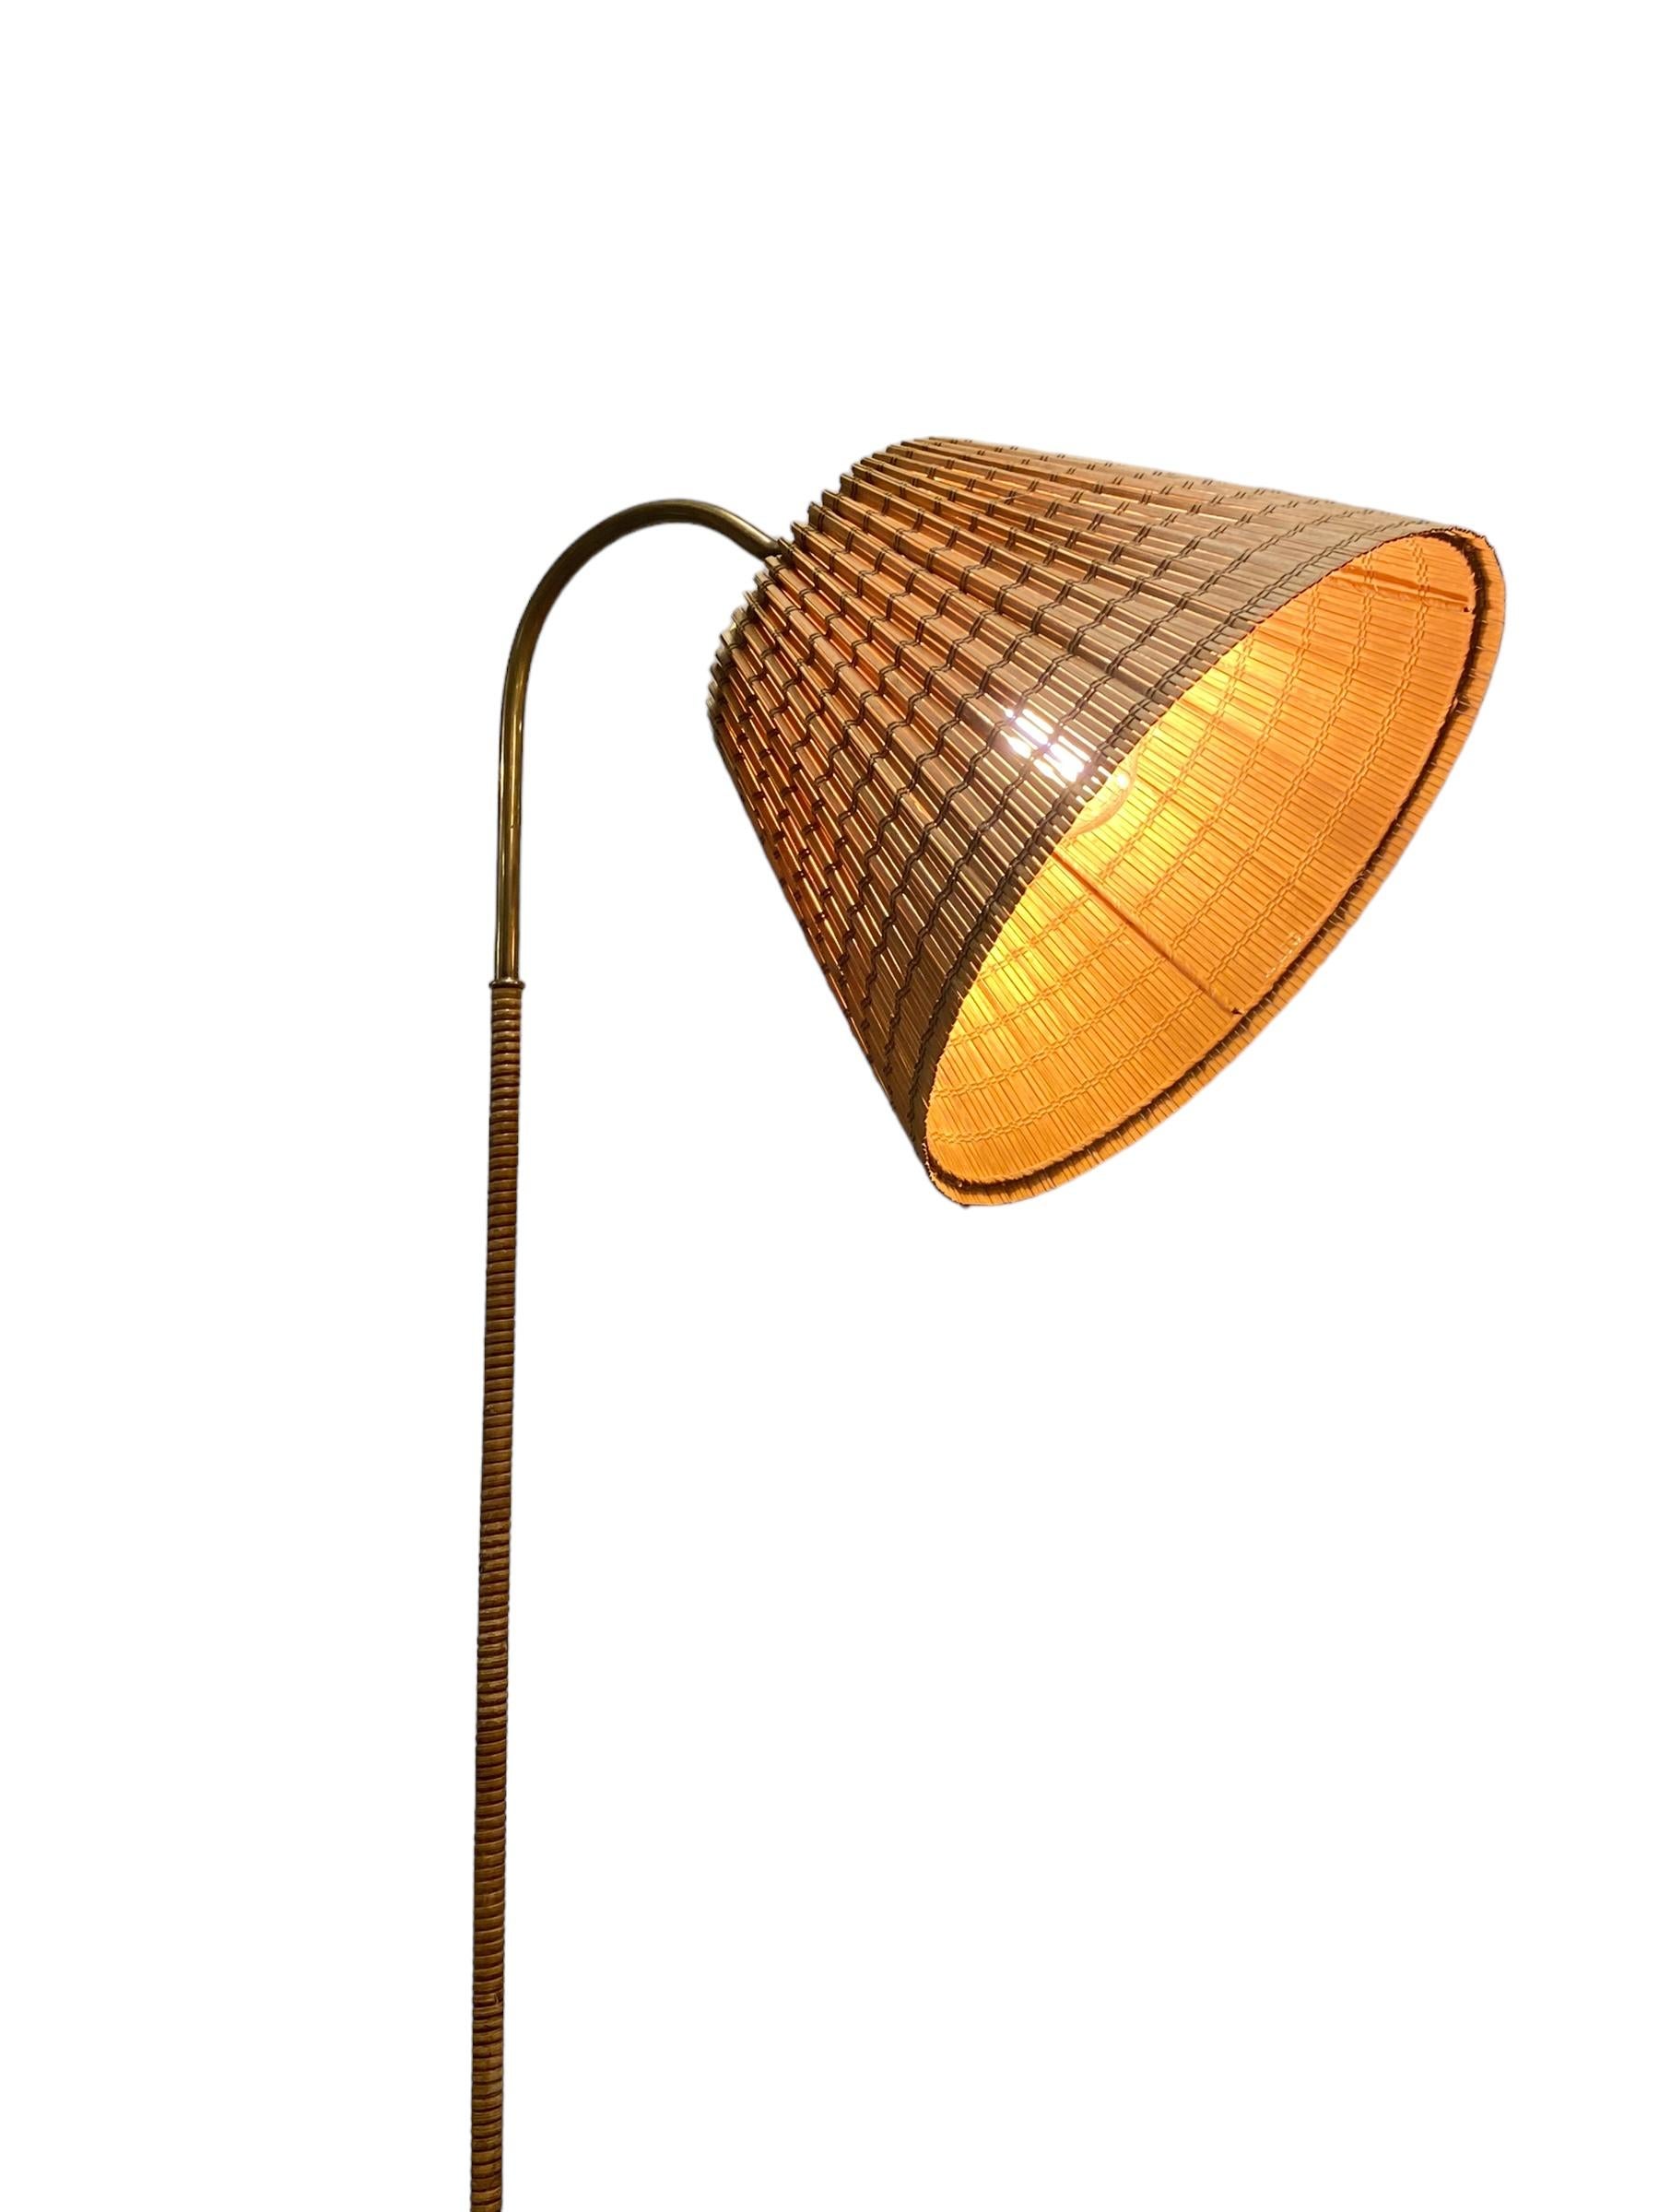 Finnish Paavo Tynell Floor Lamp model. 9609, Taito Oy 1950s For Sale